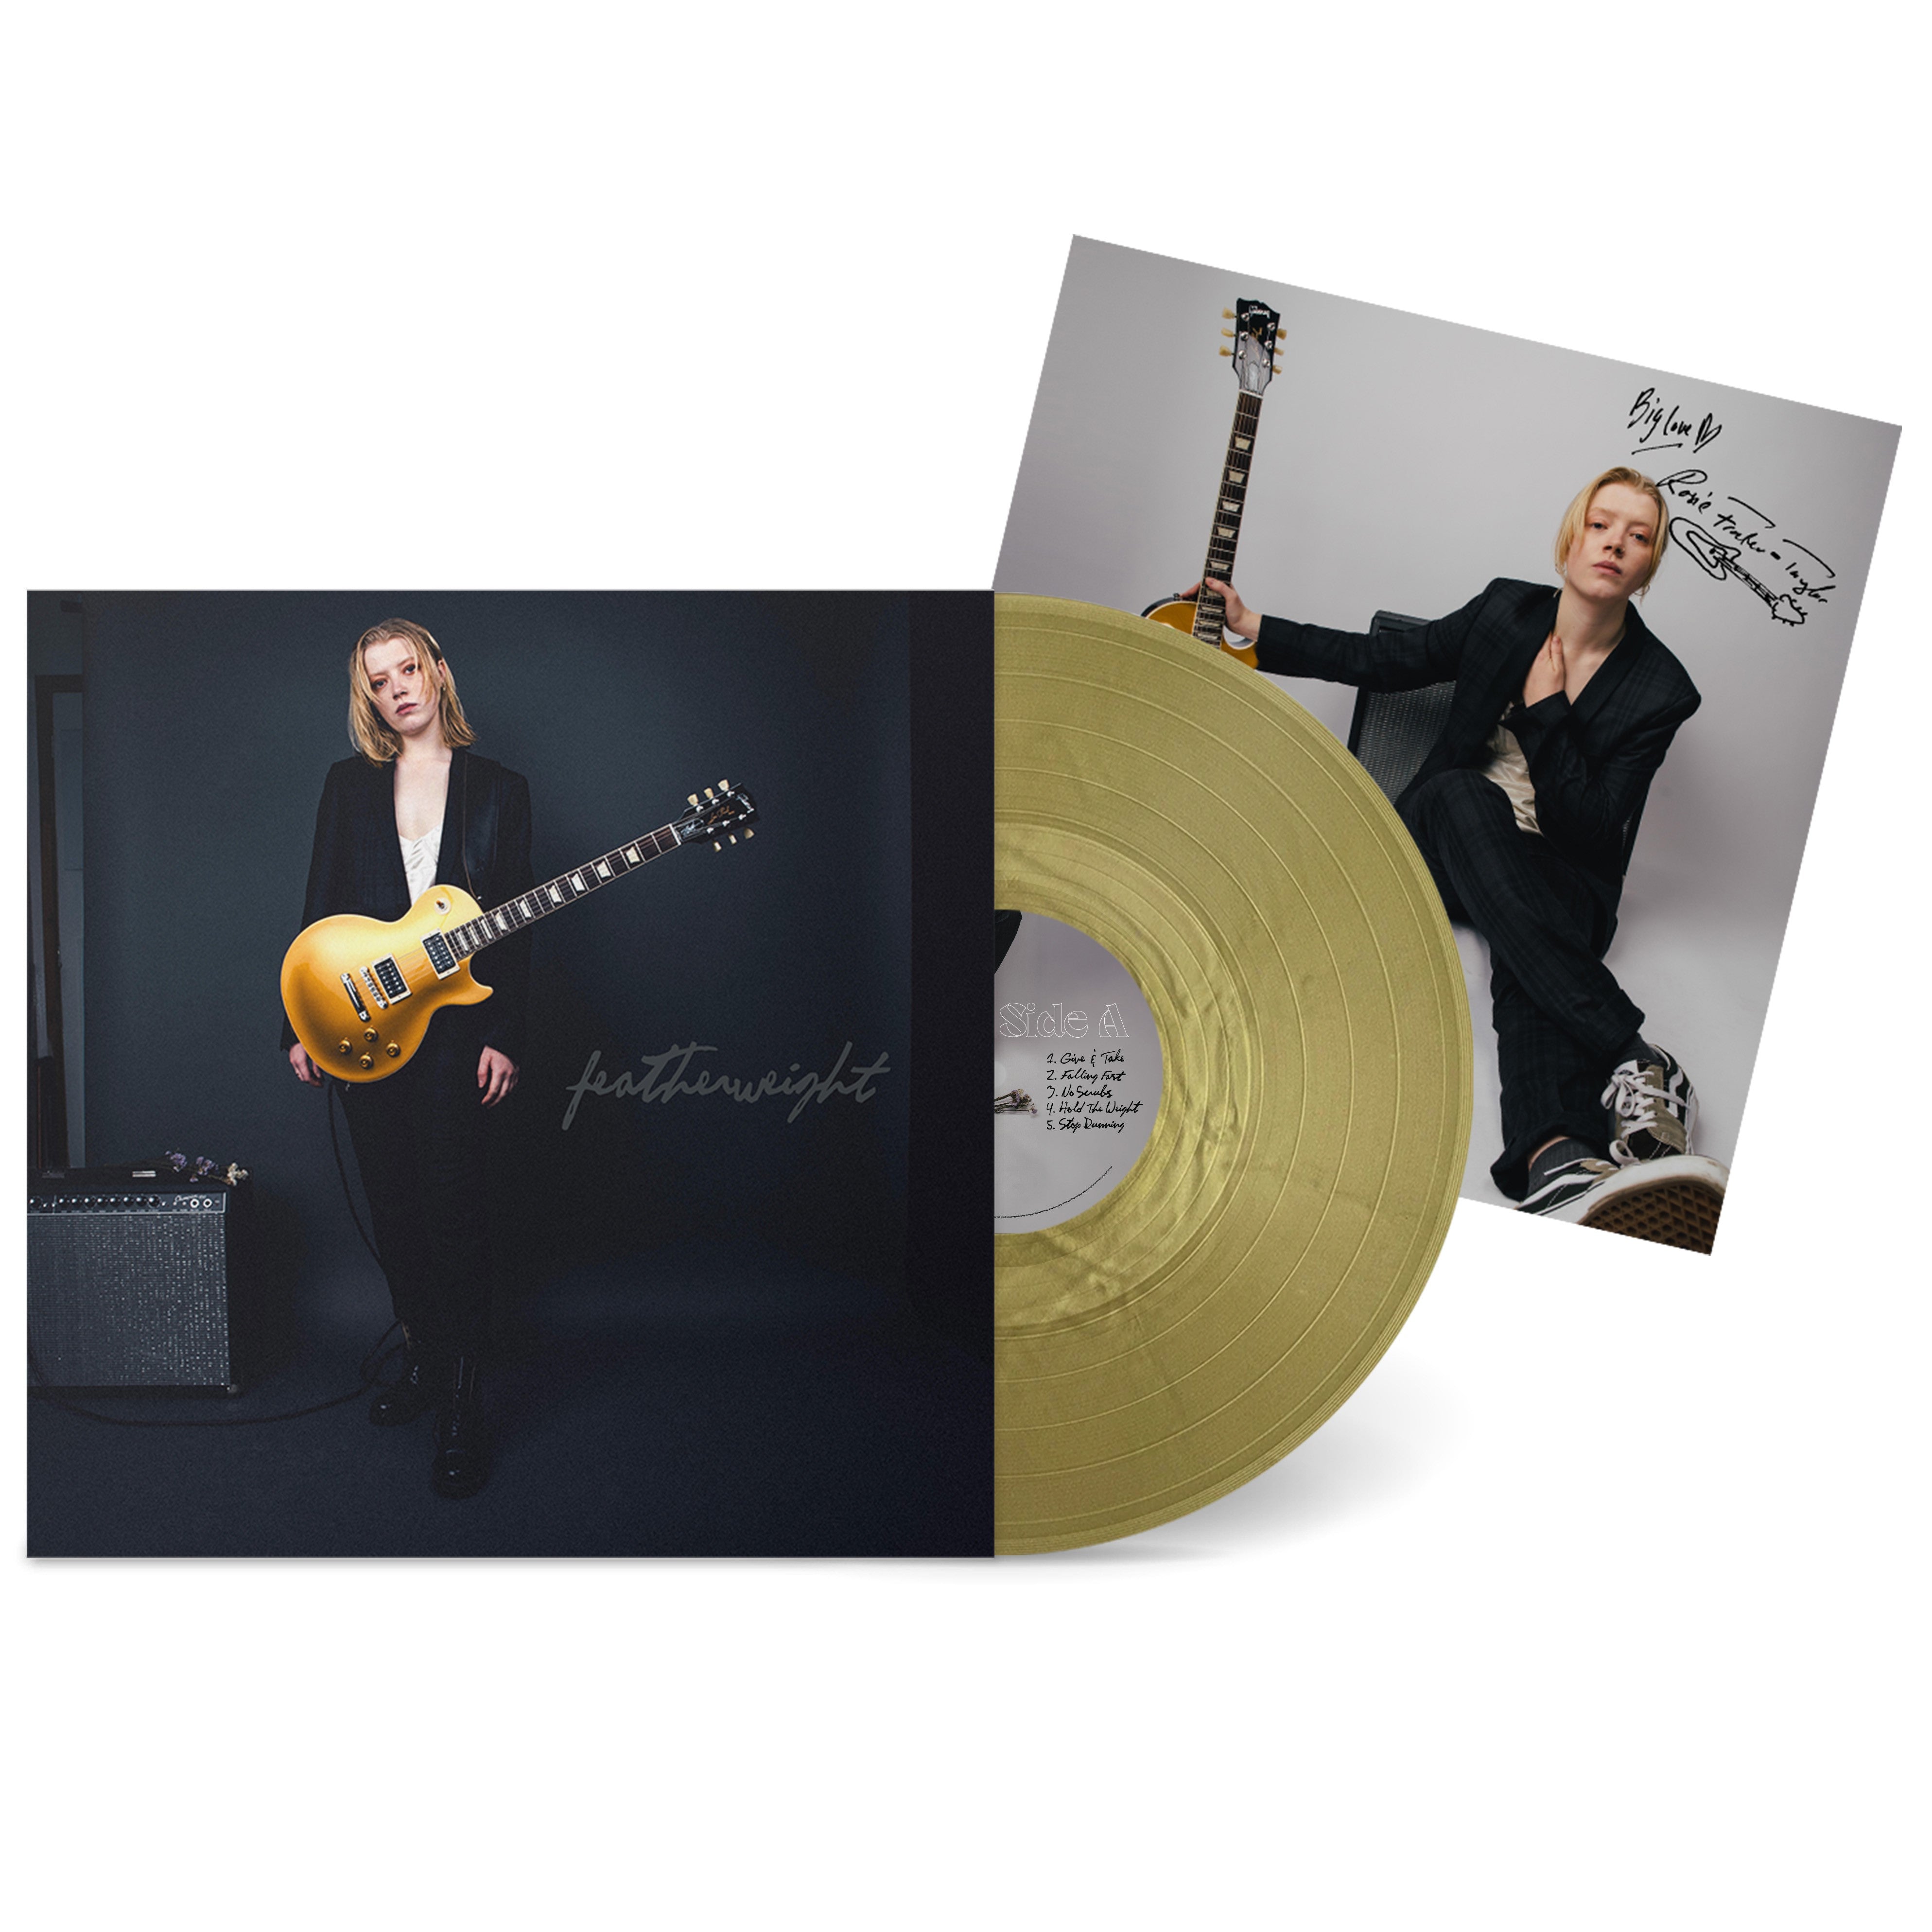 Featherweight: Limited Gold Vinyl LP & Signed Print [80 Available]